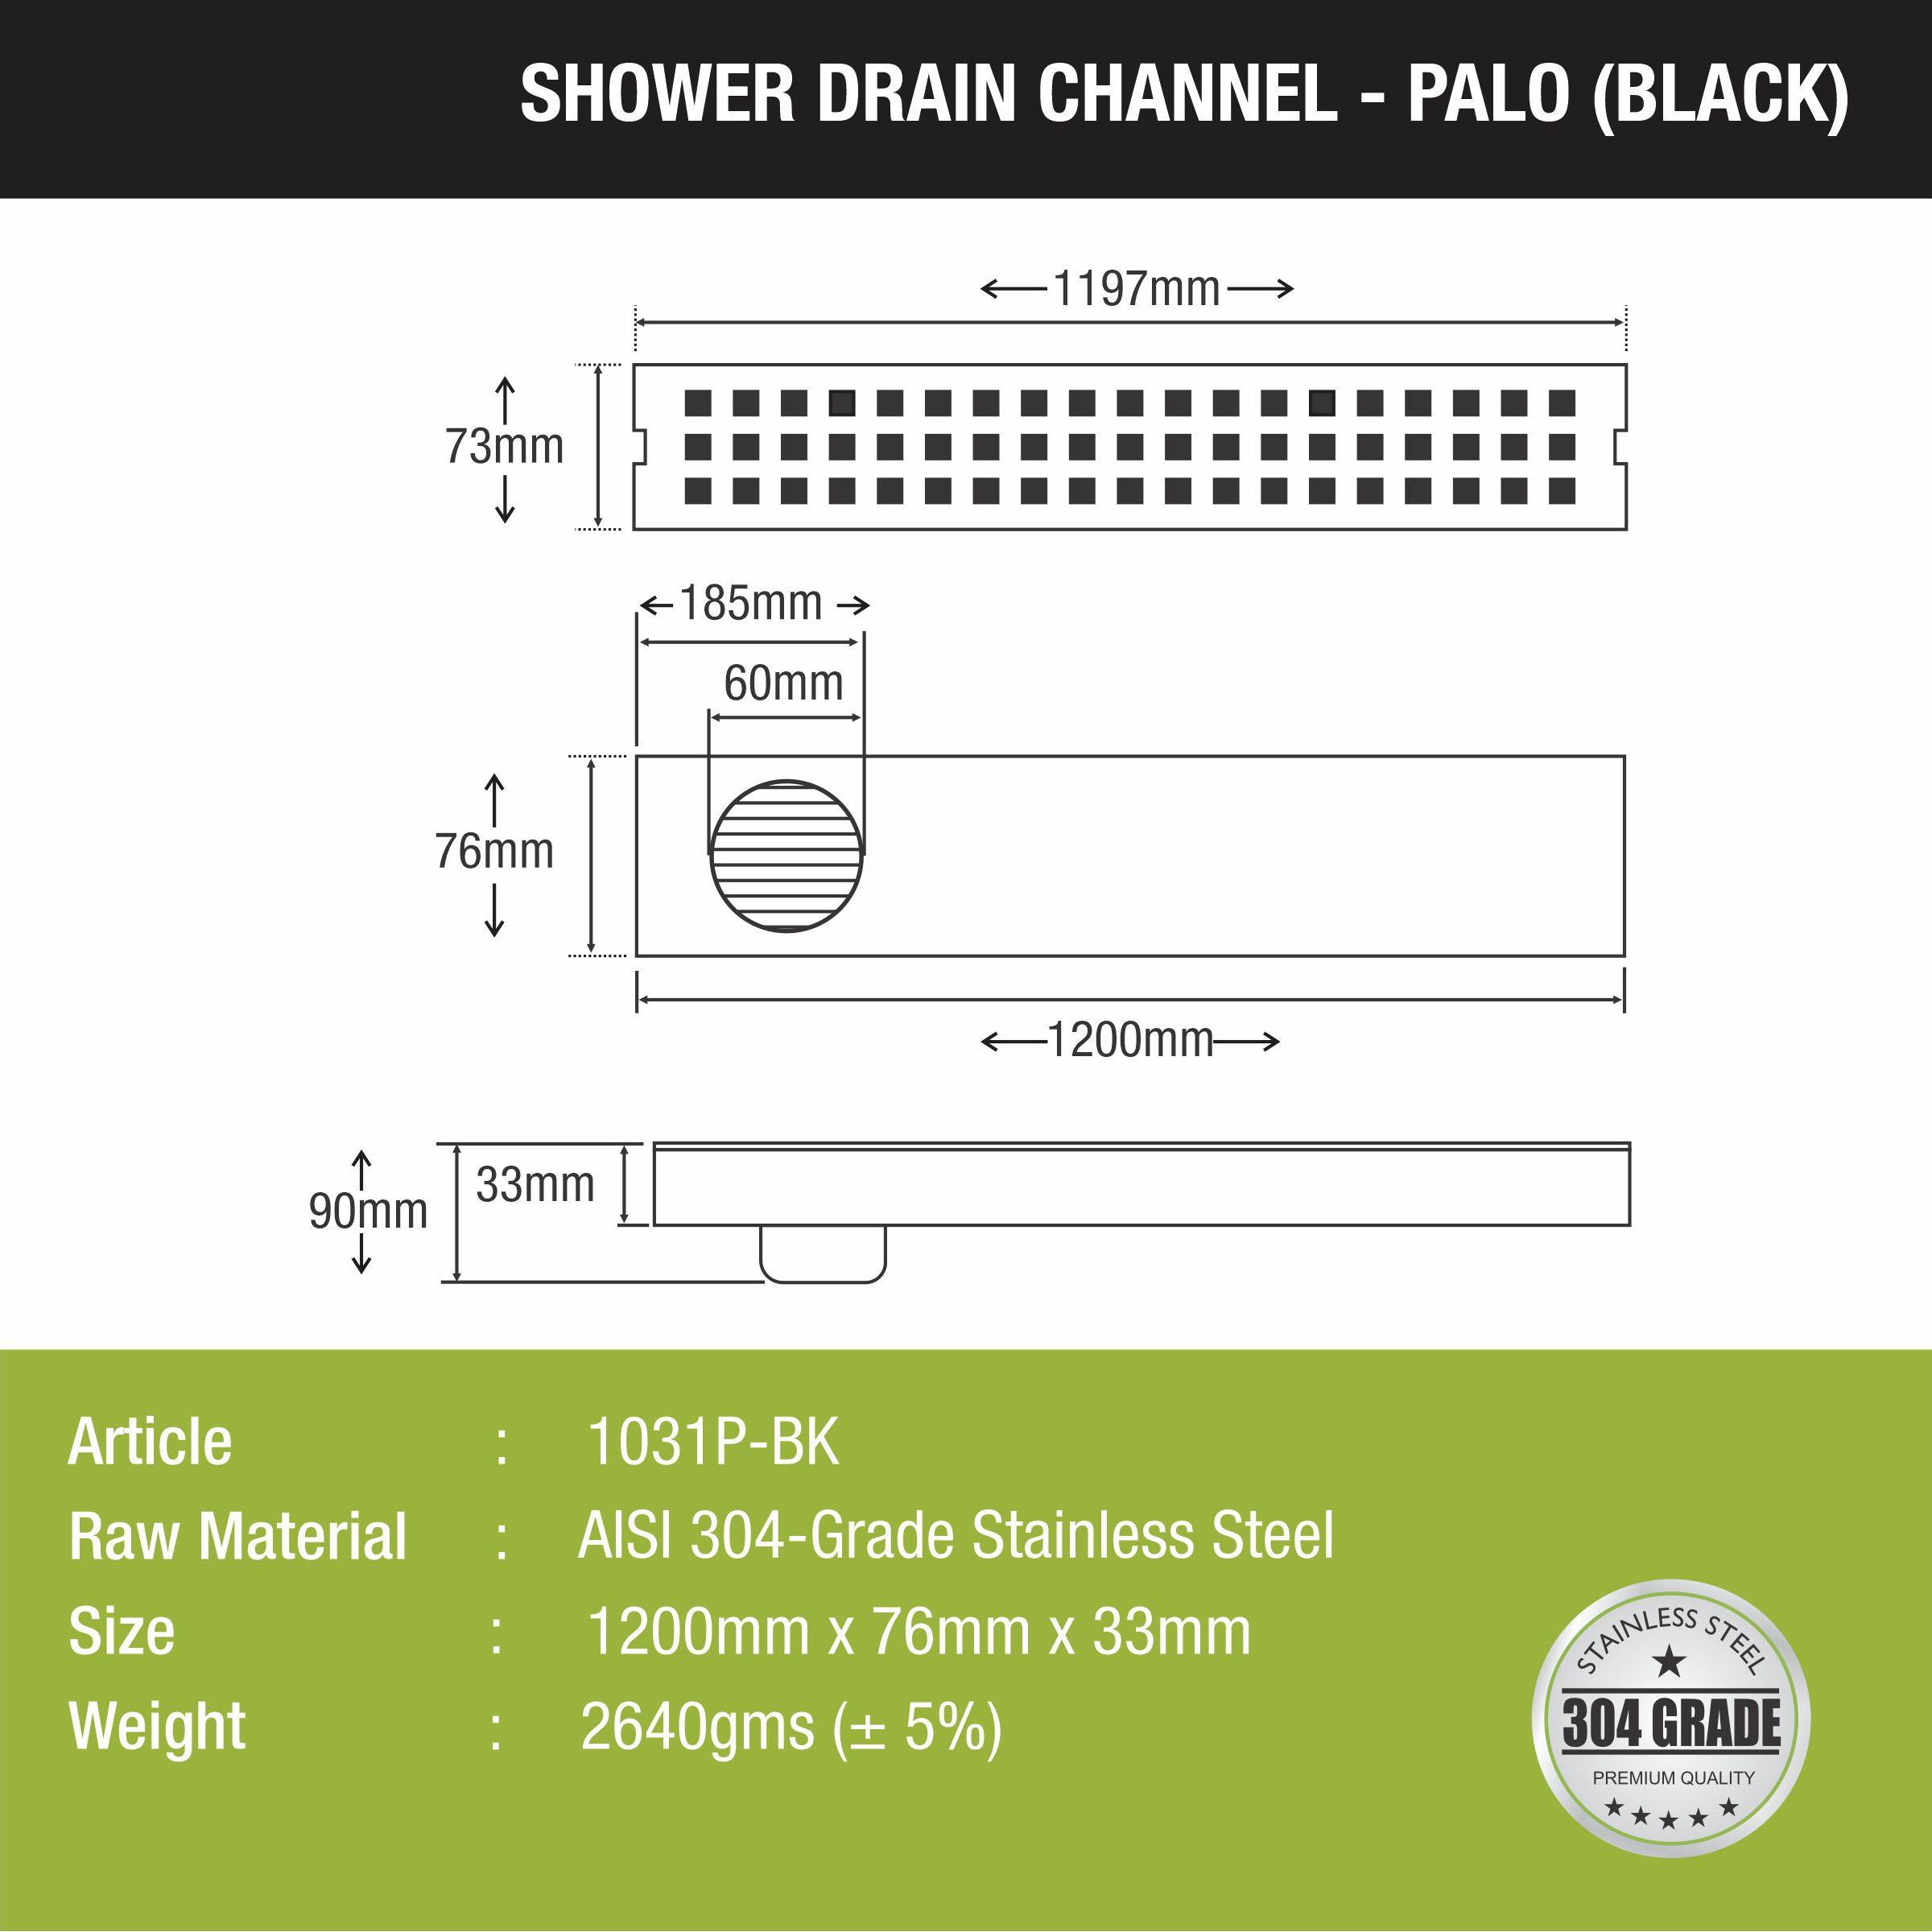 Palo Shower Drain Channel - Black (48 x 3 Inches) size and measurement